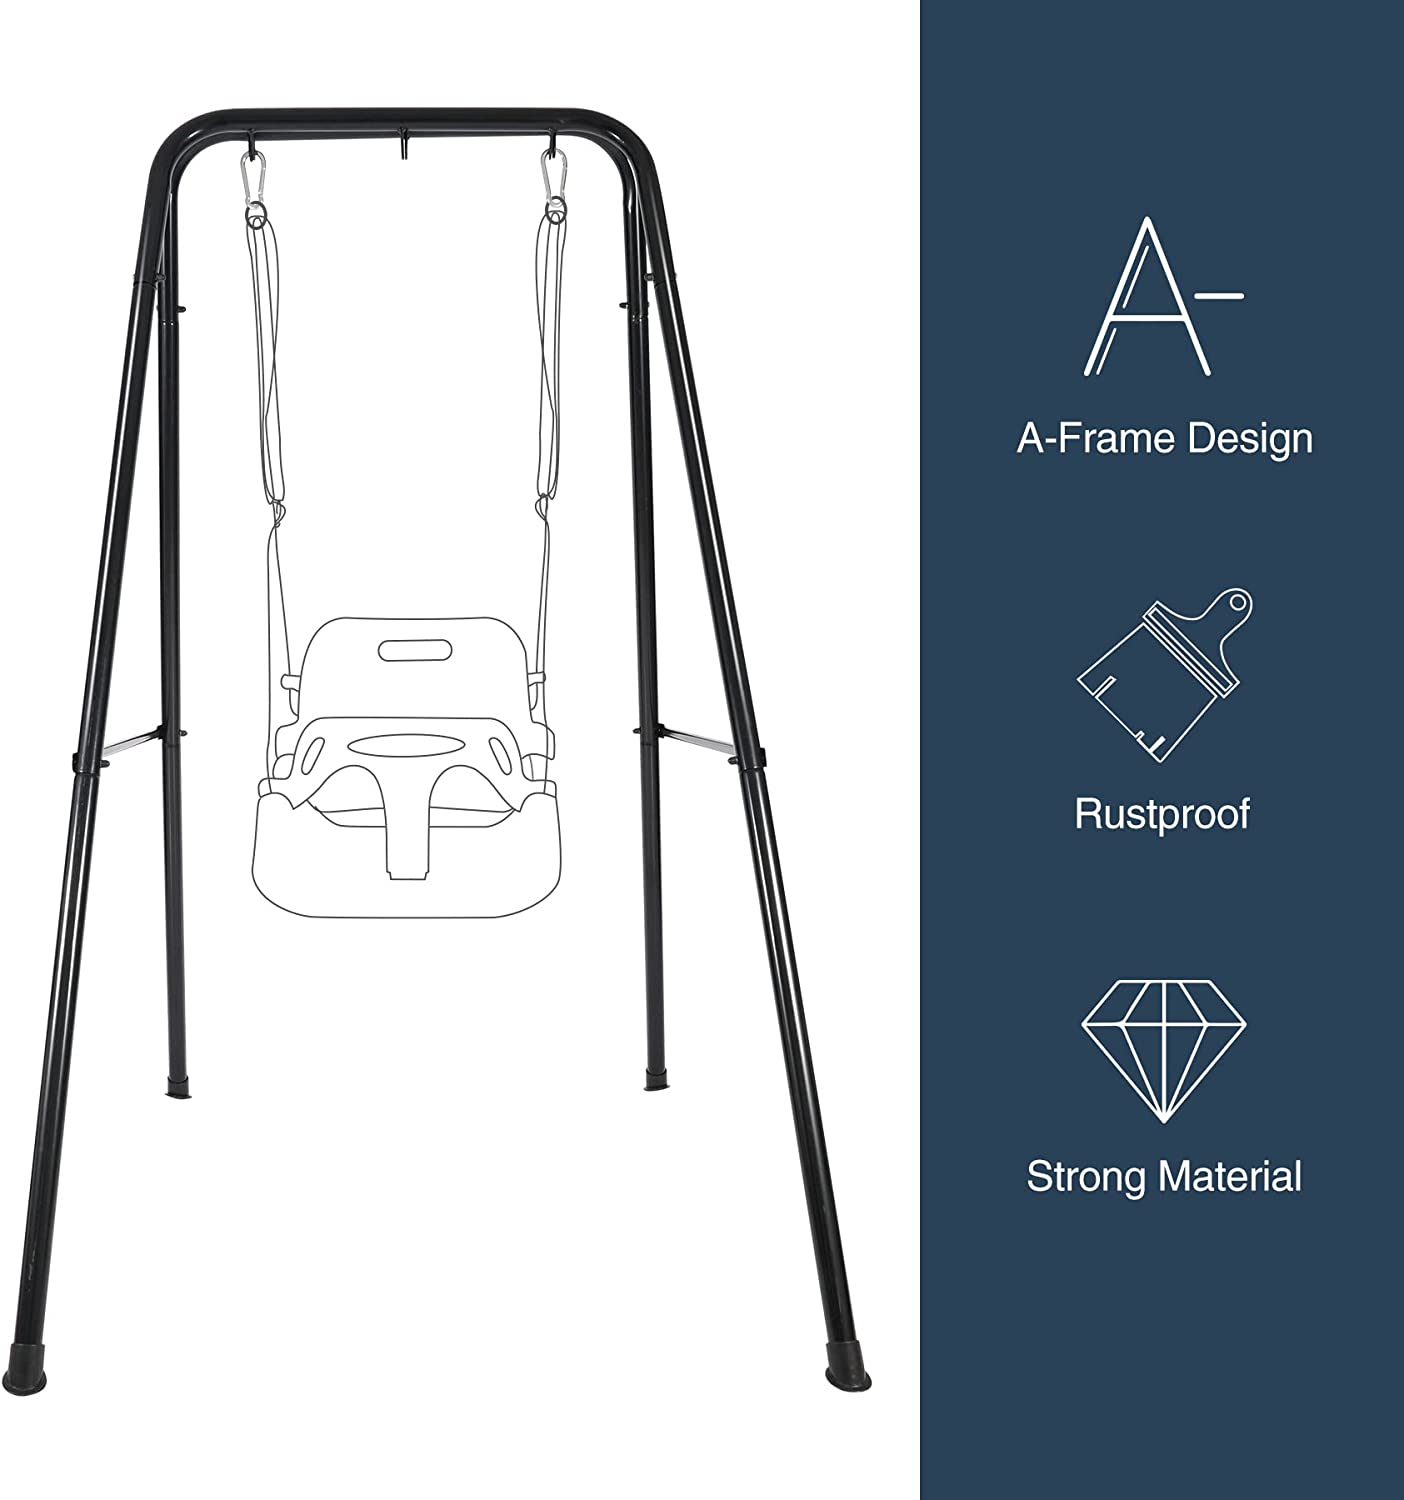 REDCAMP Hammock Chair Stand, Multi-Use Swing Stand for Kids Adult, A-Frame Swing Set for Backyard, Heavy Duty Steel Hammock Stand for Outdoor Indoor, 330lbs Weight Capacity - image 5 of 8